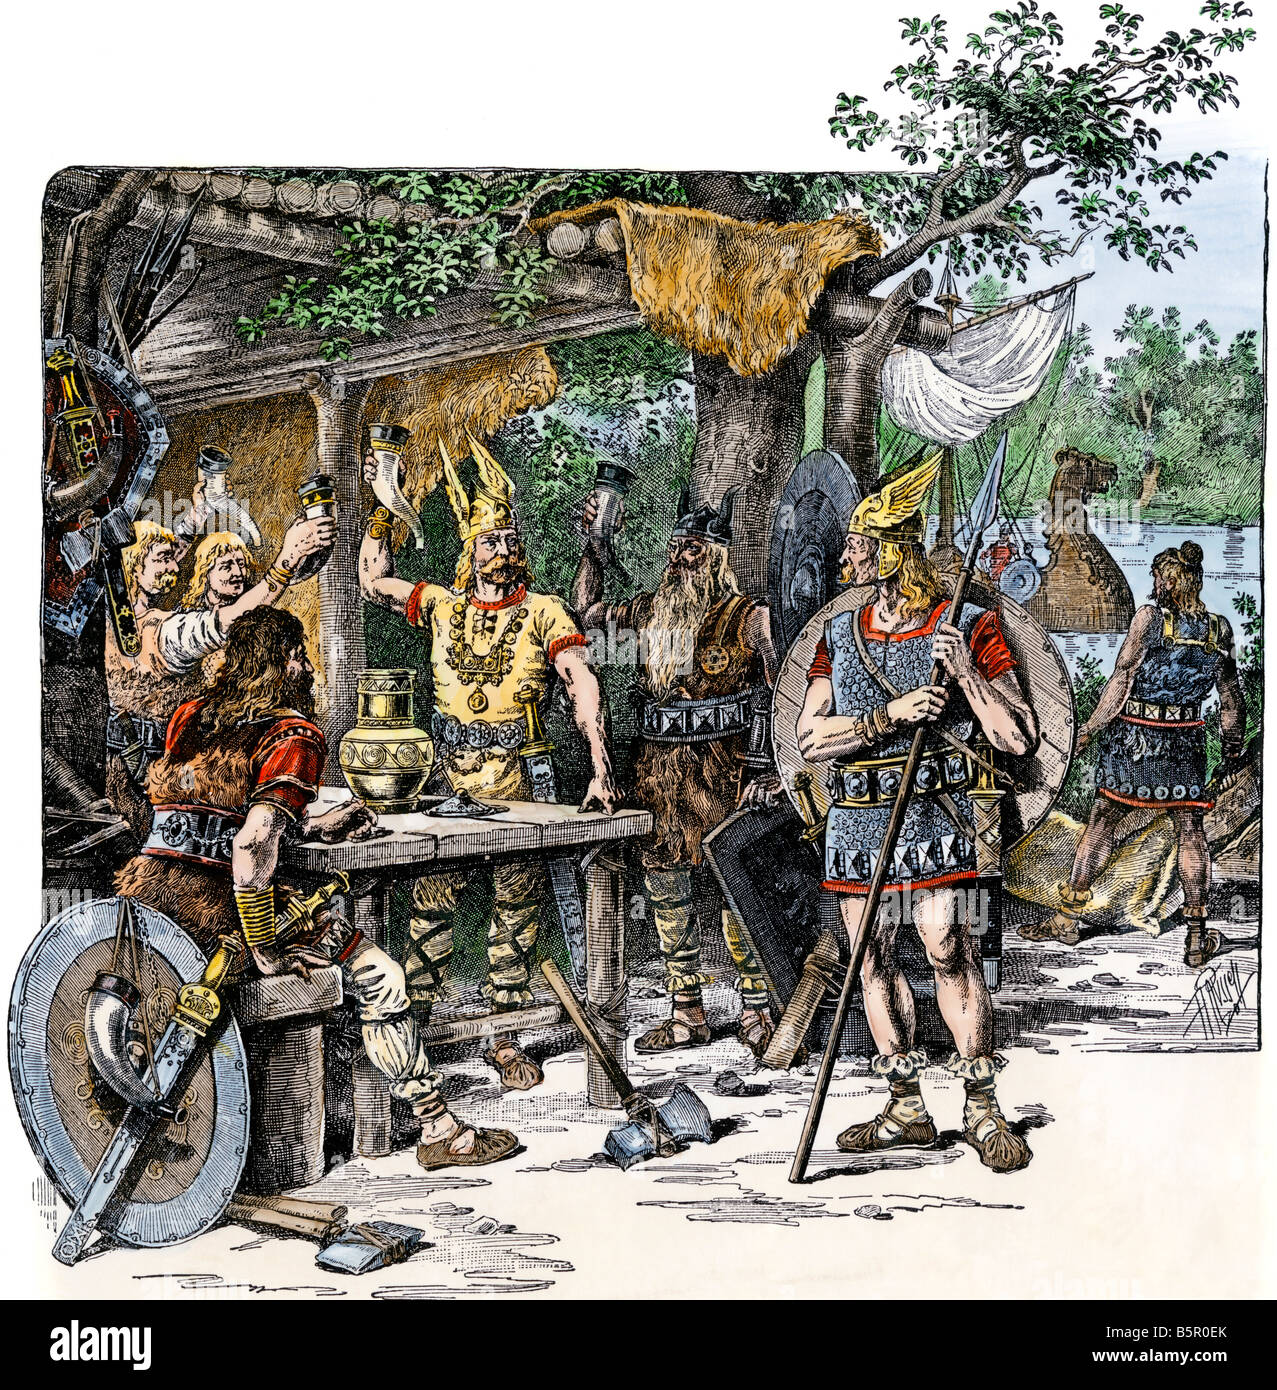 Norsemen celebrating their discovery of the New World. Hand-colored woodcut Stock Photo